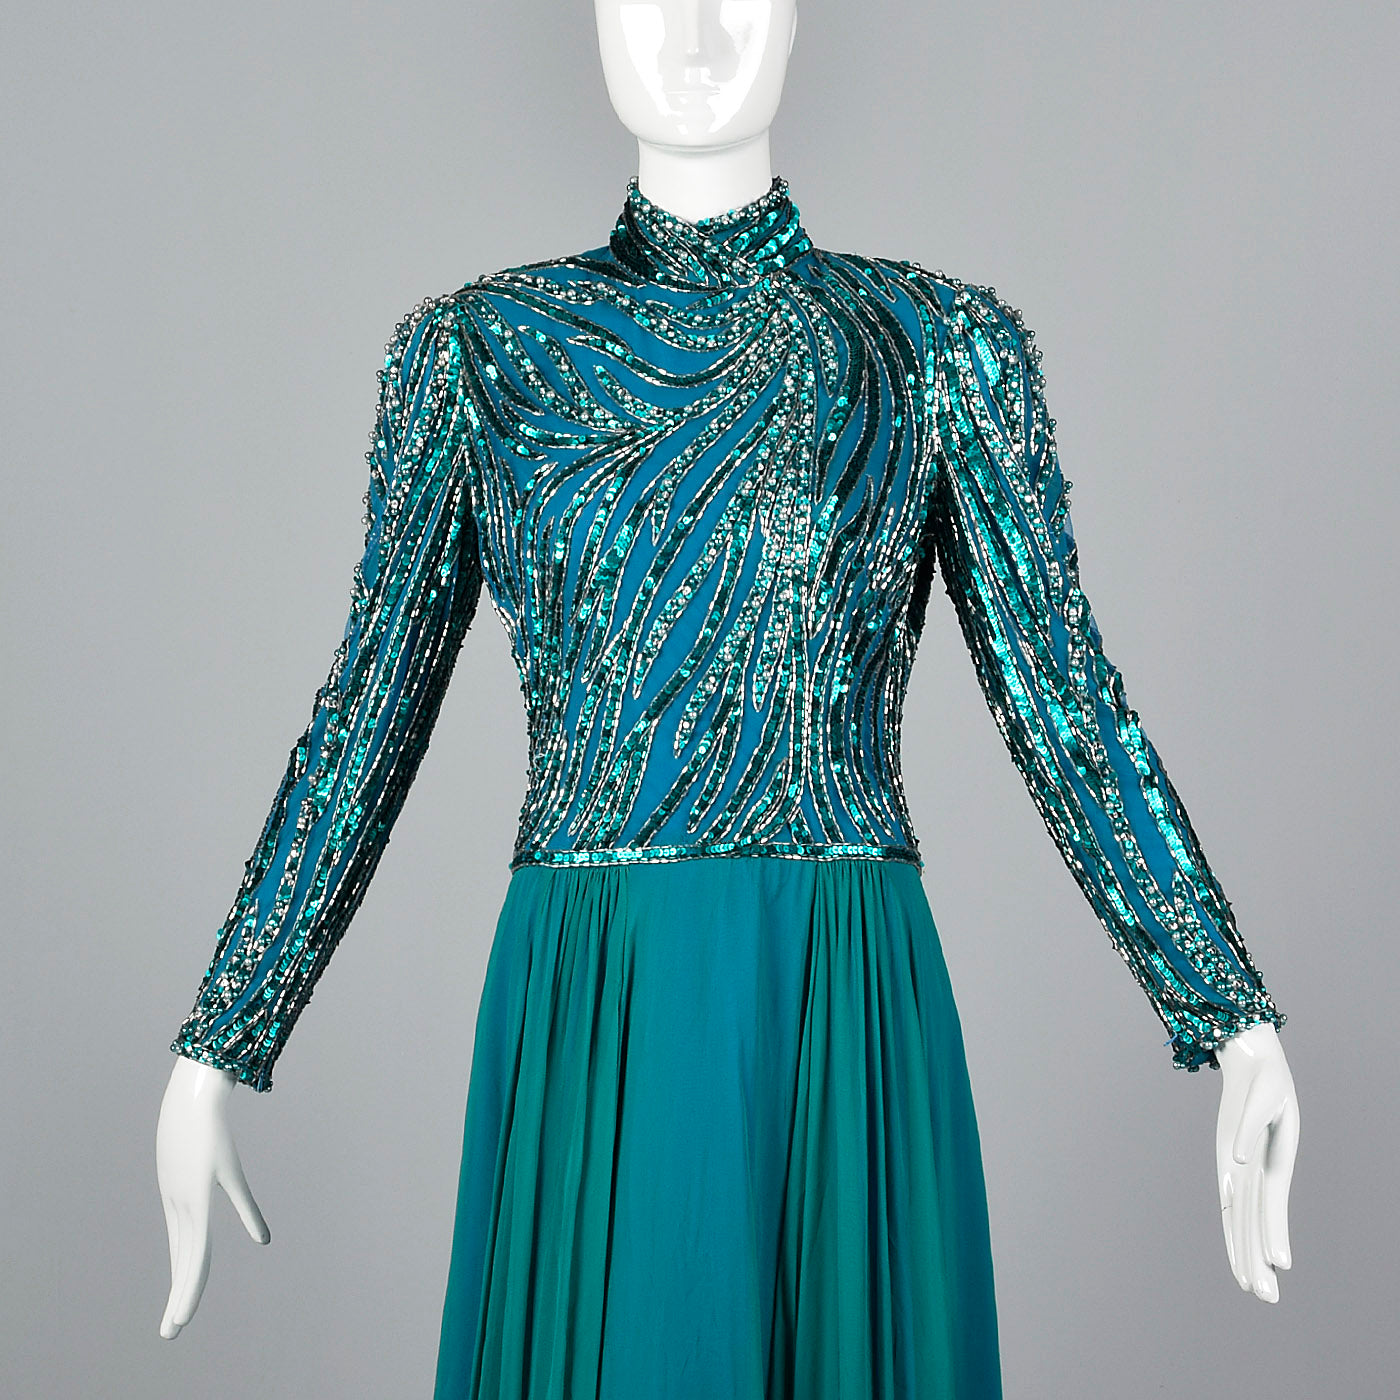 Sequined Bob Mackie Gown with a Layered Silk Chiffon Skirt